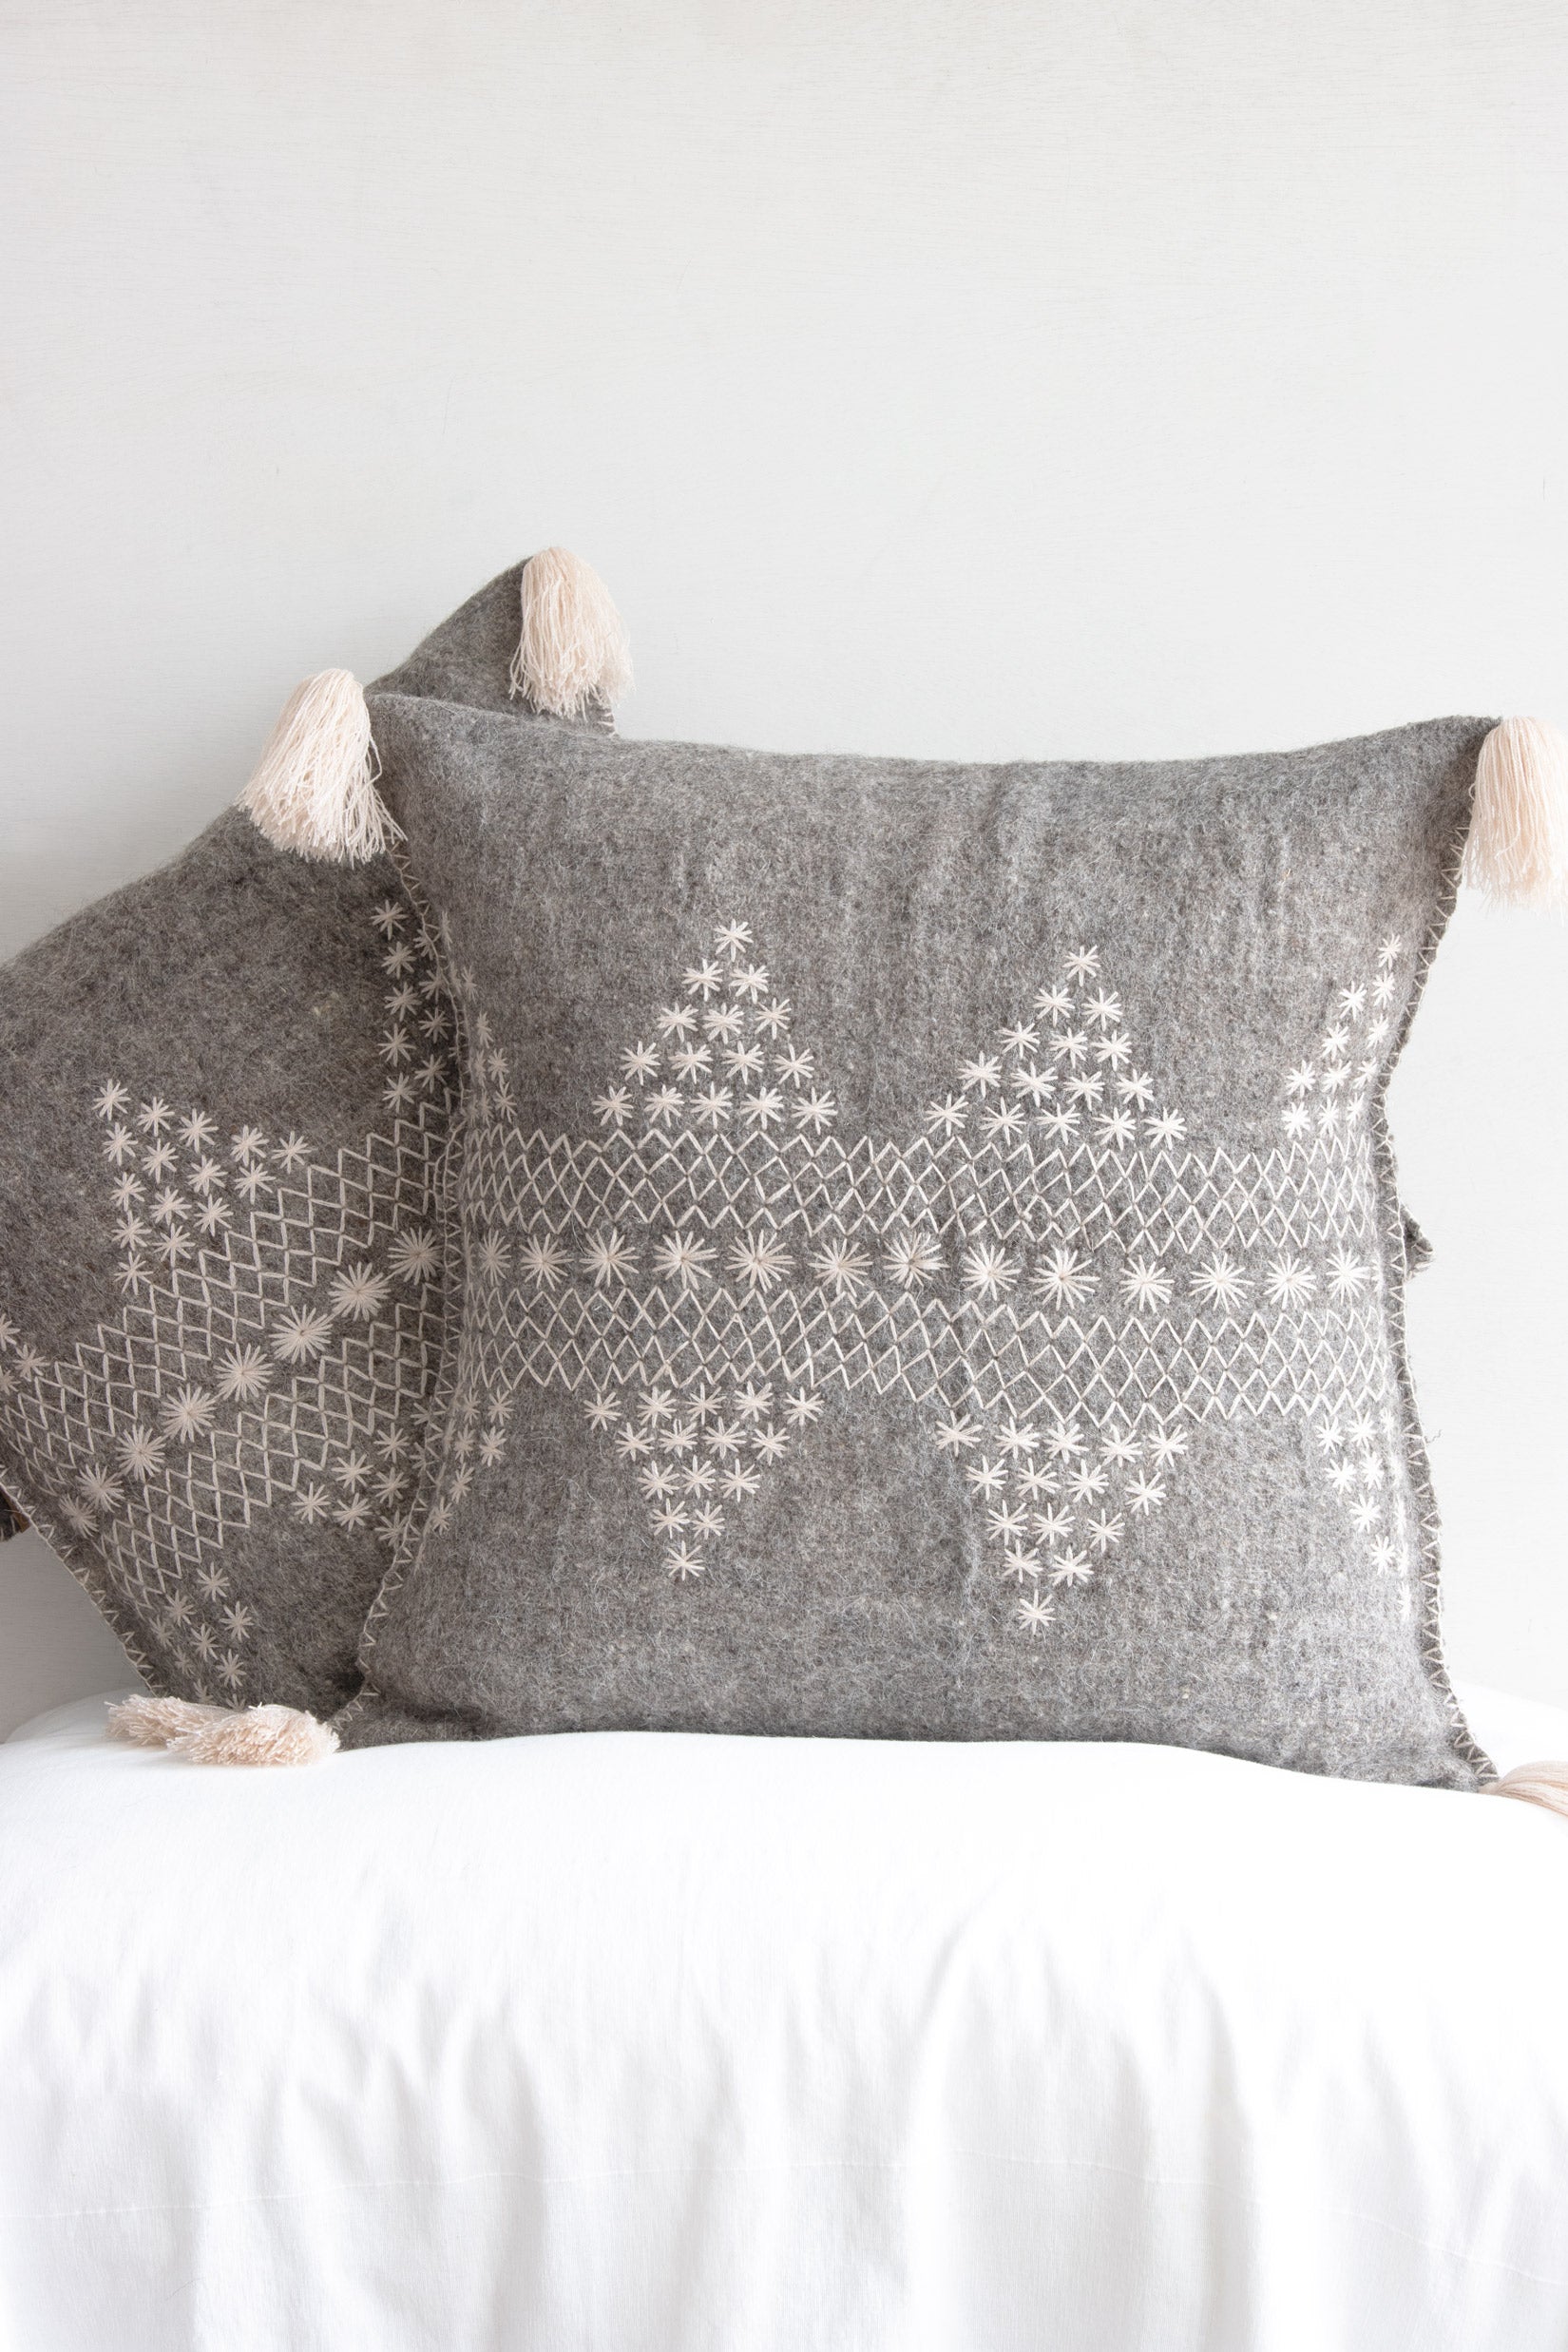 Two square woven grey wool accent pillows with decorative cream embroidery and cream fringe tassels at each corner